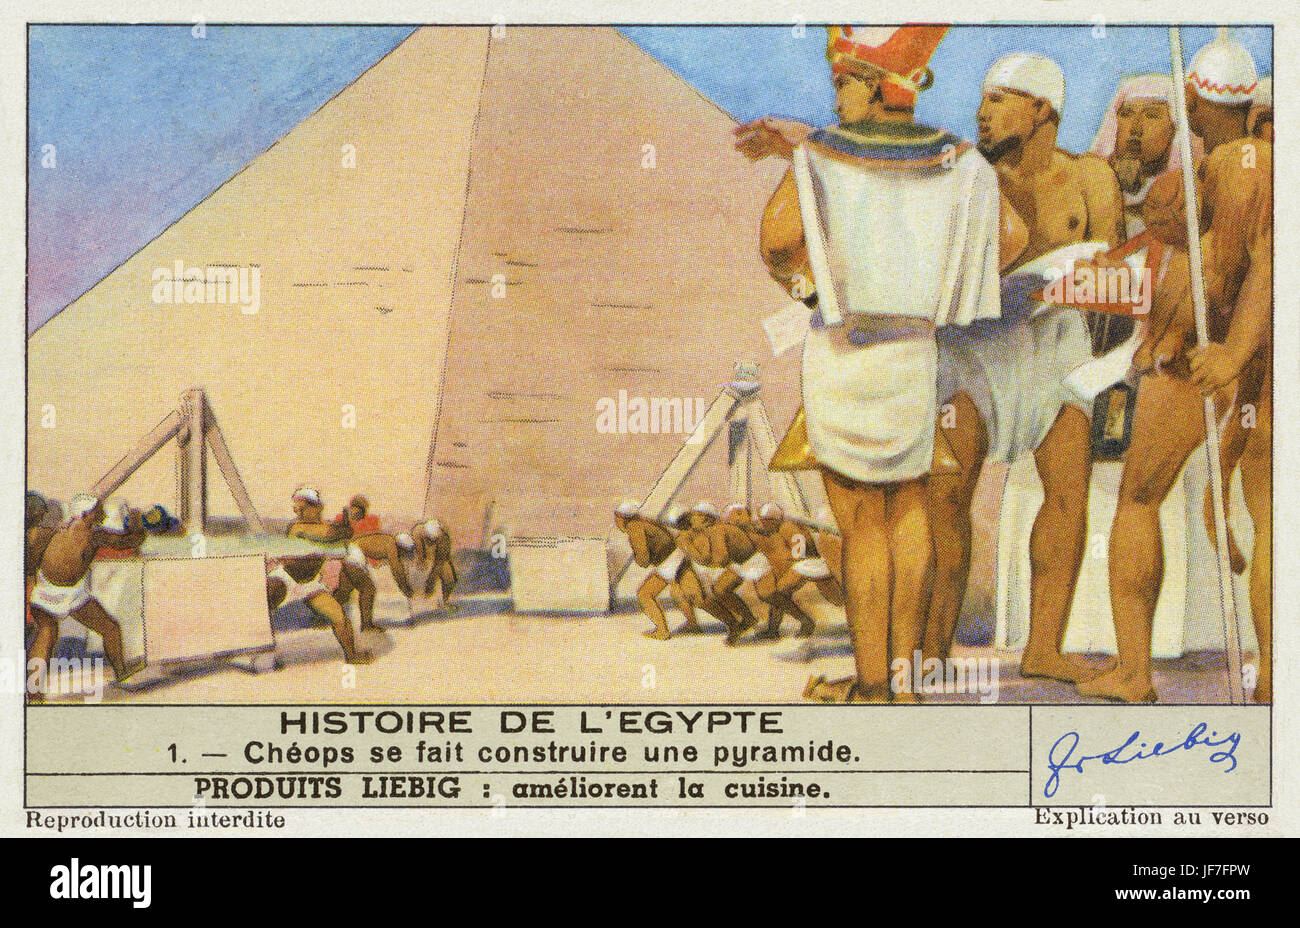 Cheops / Kheops/ king Khufu constructs a pyramid .  4th dynasty Egyptian Pharoah (History of Egypt - ) Stock Photo